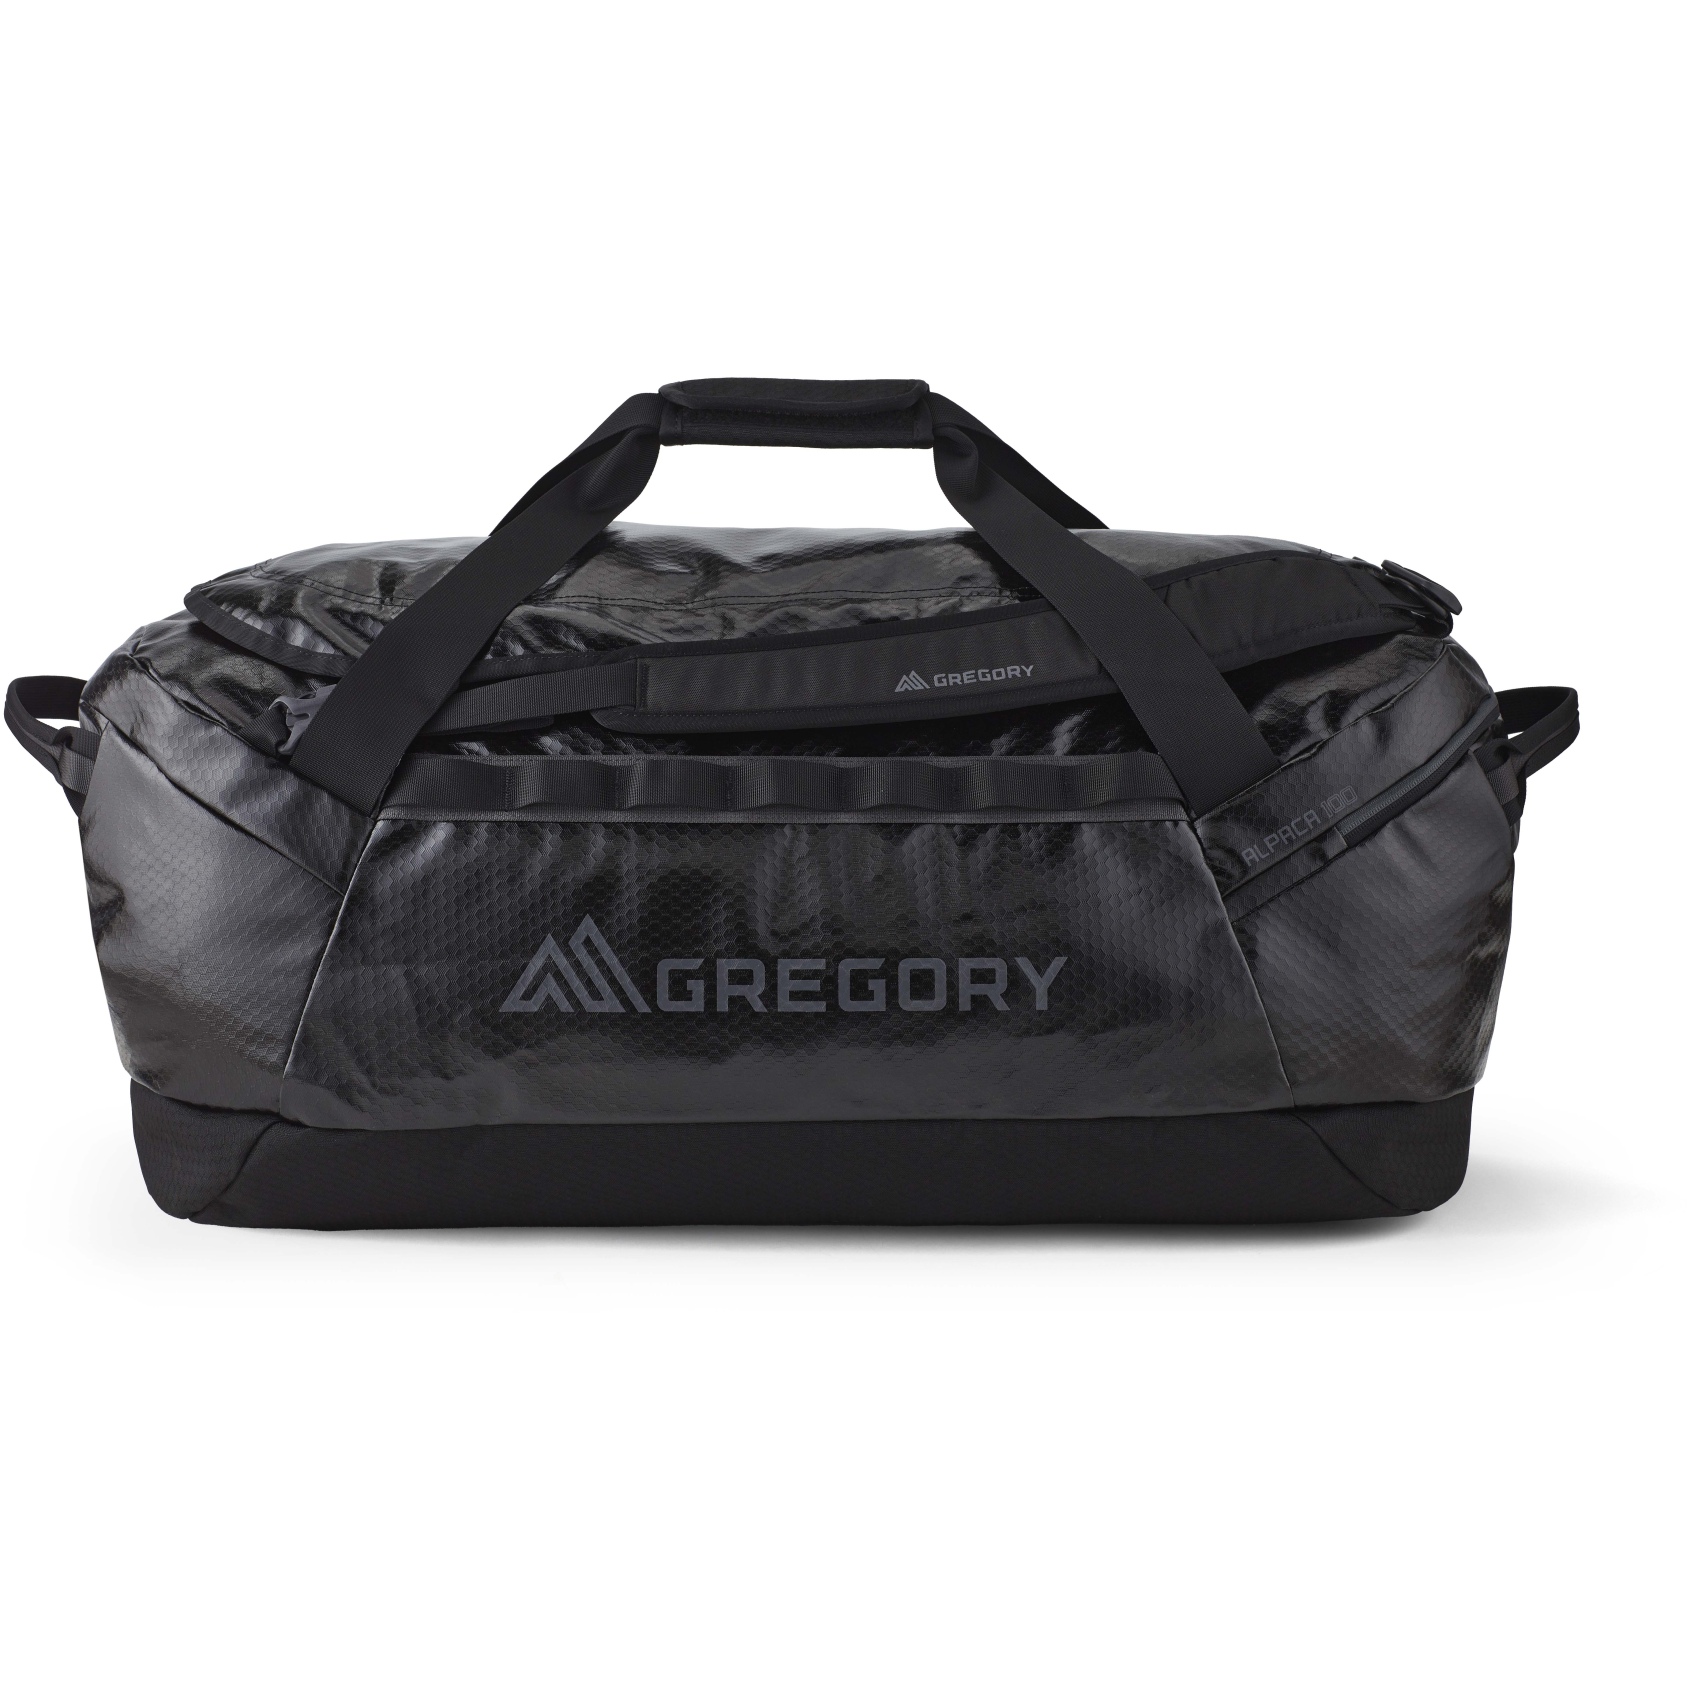 Picture of Gregory Alpaca 100 Travel Bag - Obsidian Black